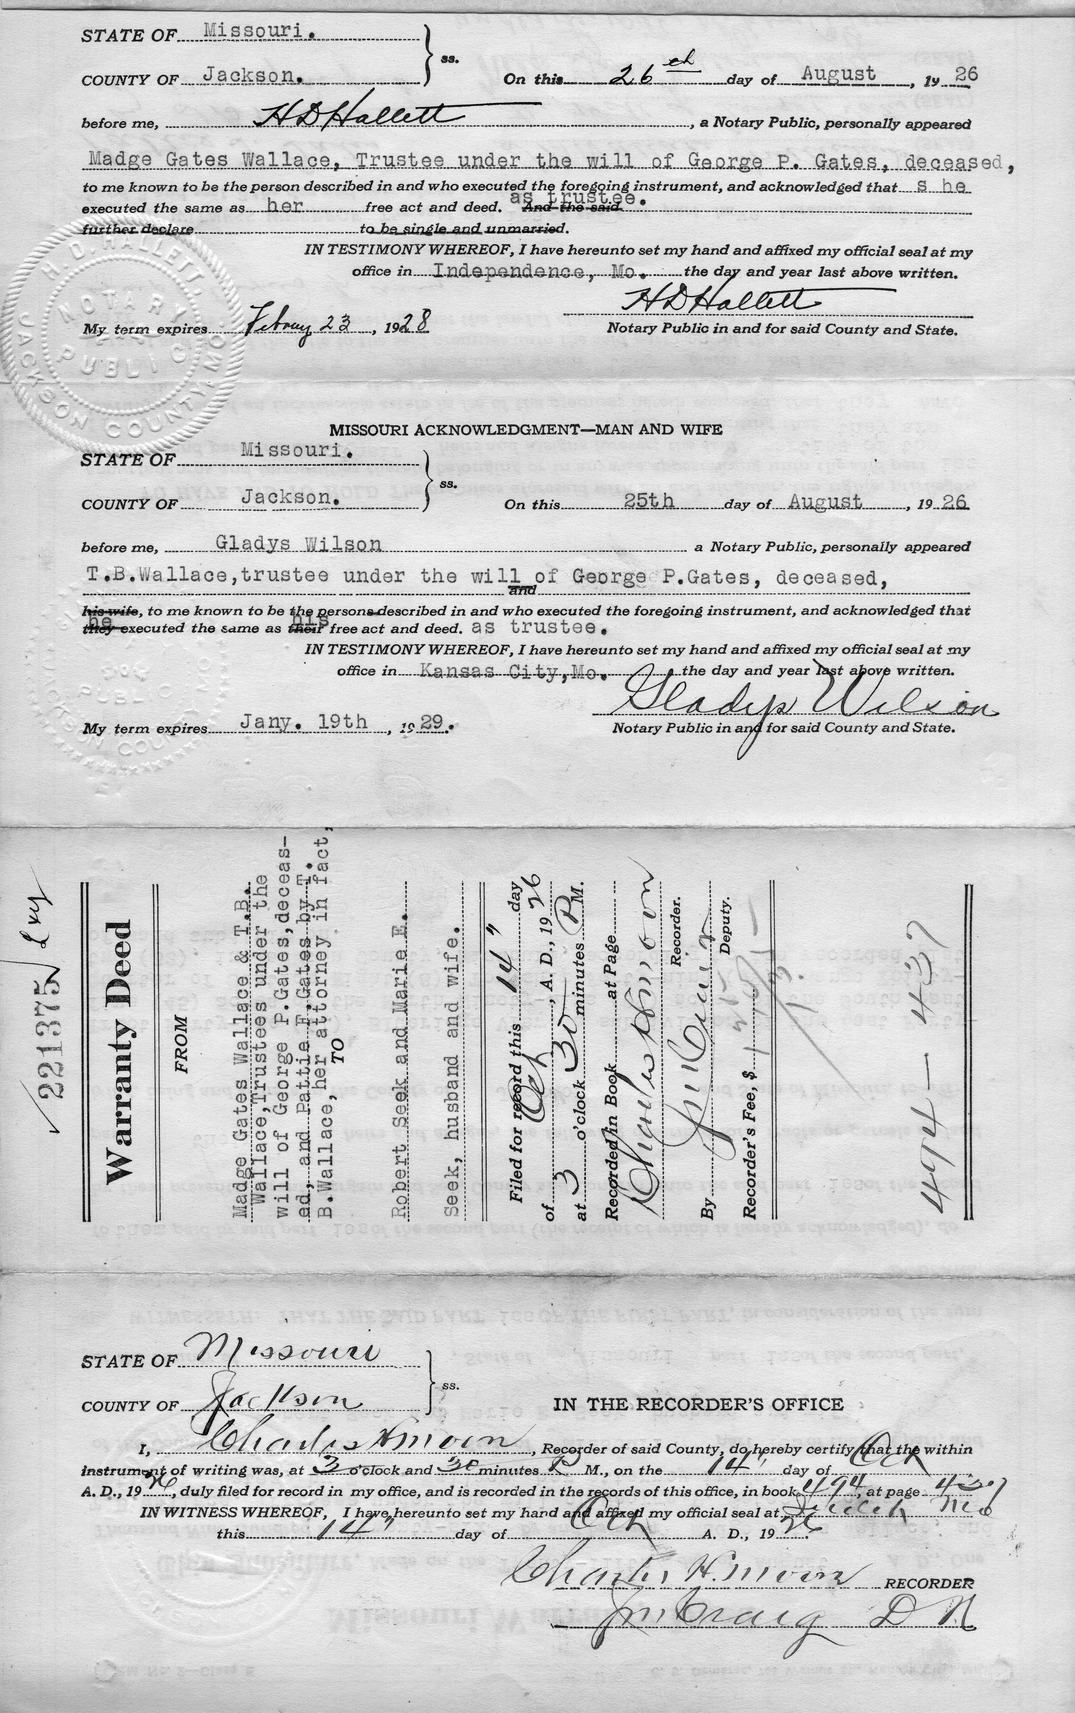 Warranty Deed from Madge Gates Wallace et al. to Robert and Marie E. Seek